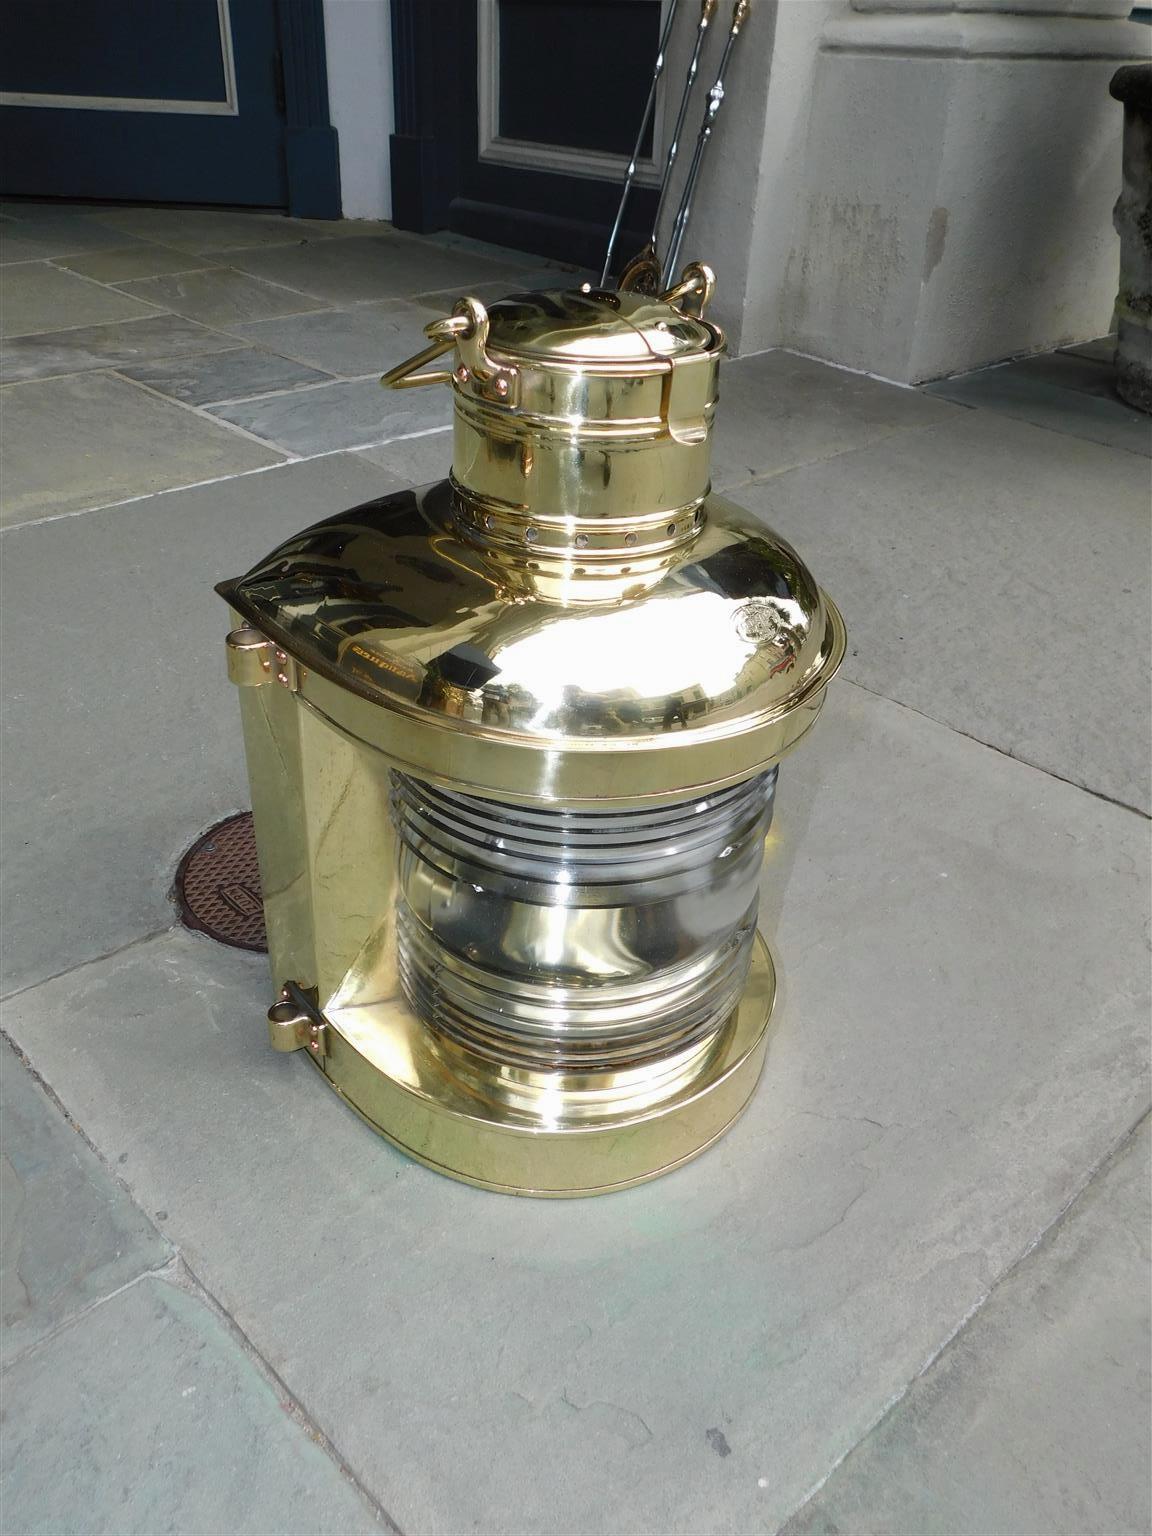 American Nautical brass Perko marine lantern with the original Fresnel lense, exterior side mounts, vents, and locking interior oil font. Stamped Perko Brooklyn, New York. Early 20th Century.
 